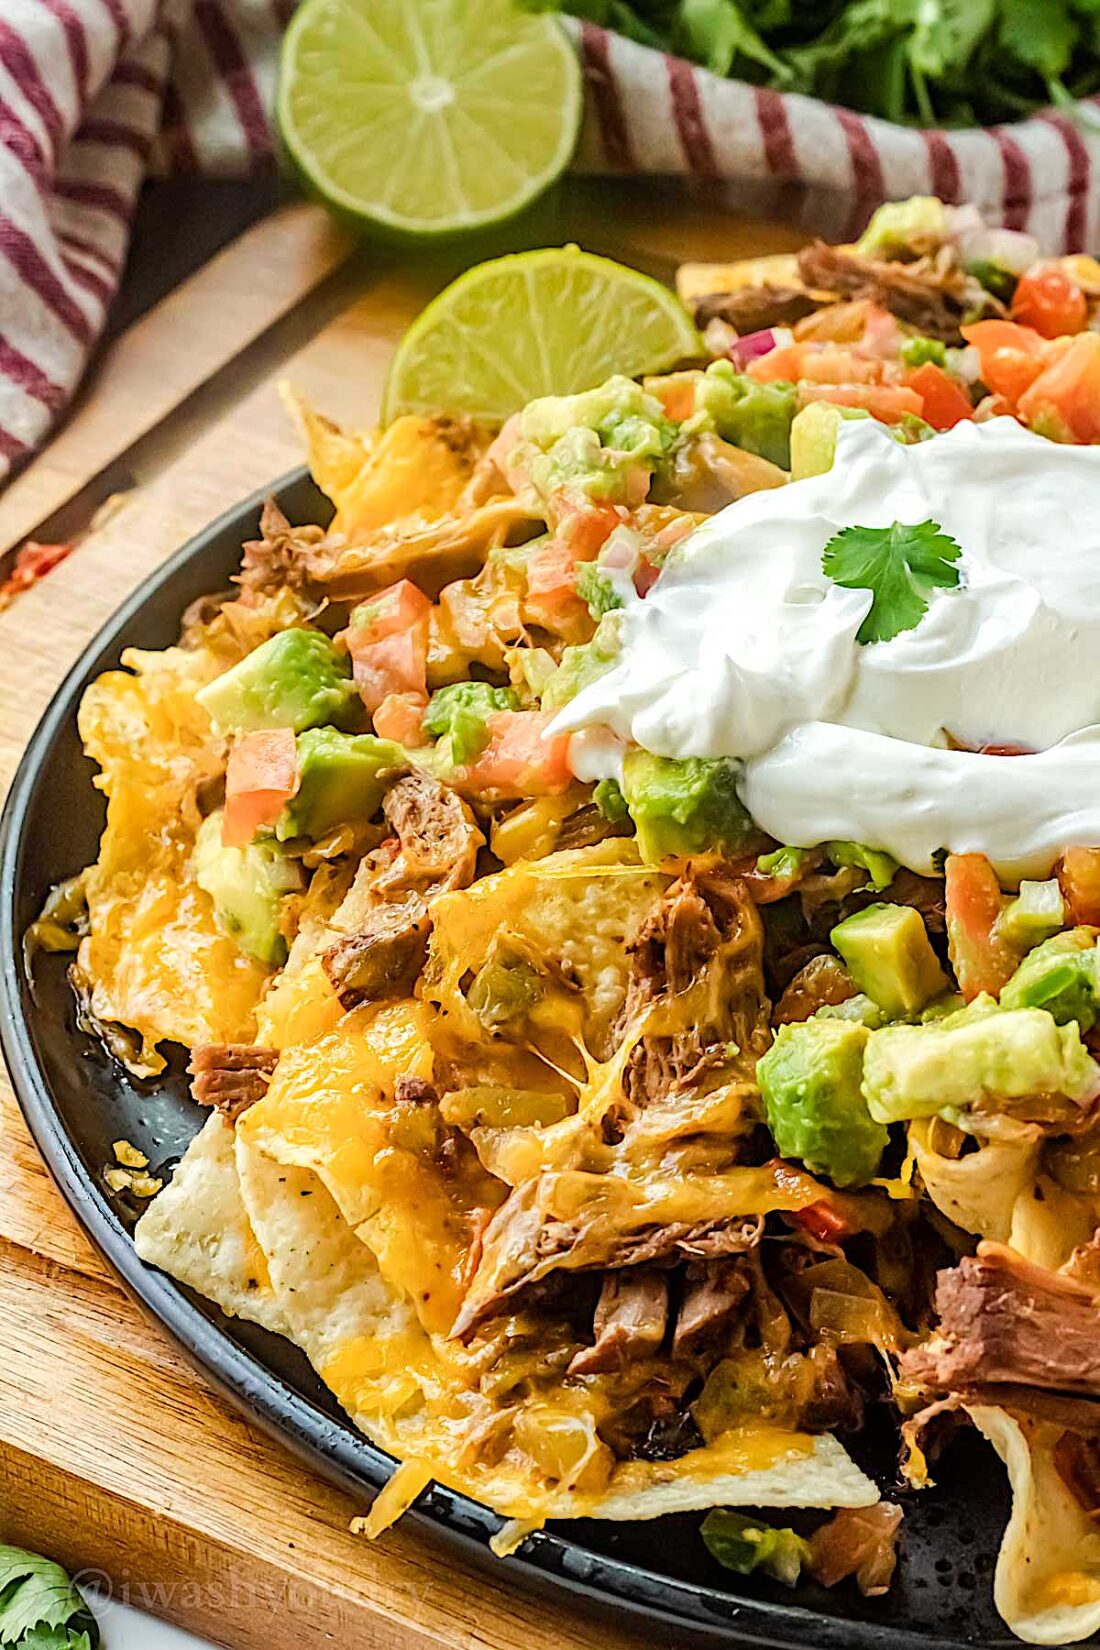 plate filled with shredded beef nachos and nacho toppings.